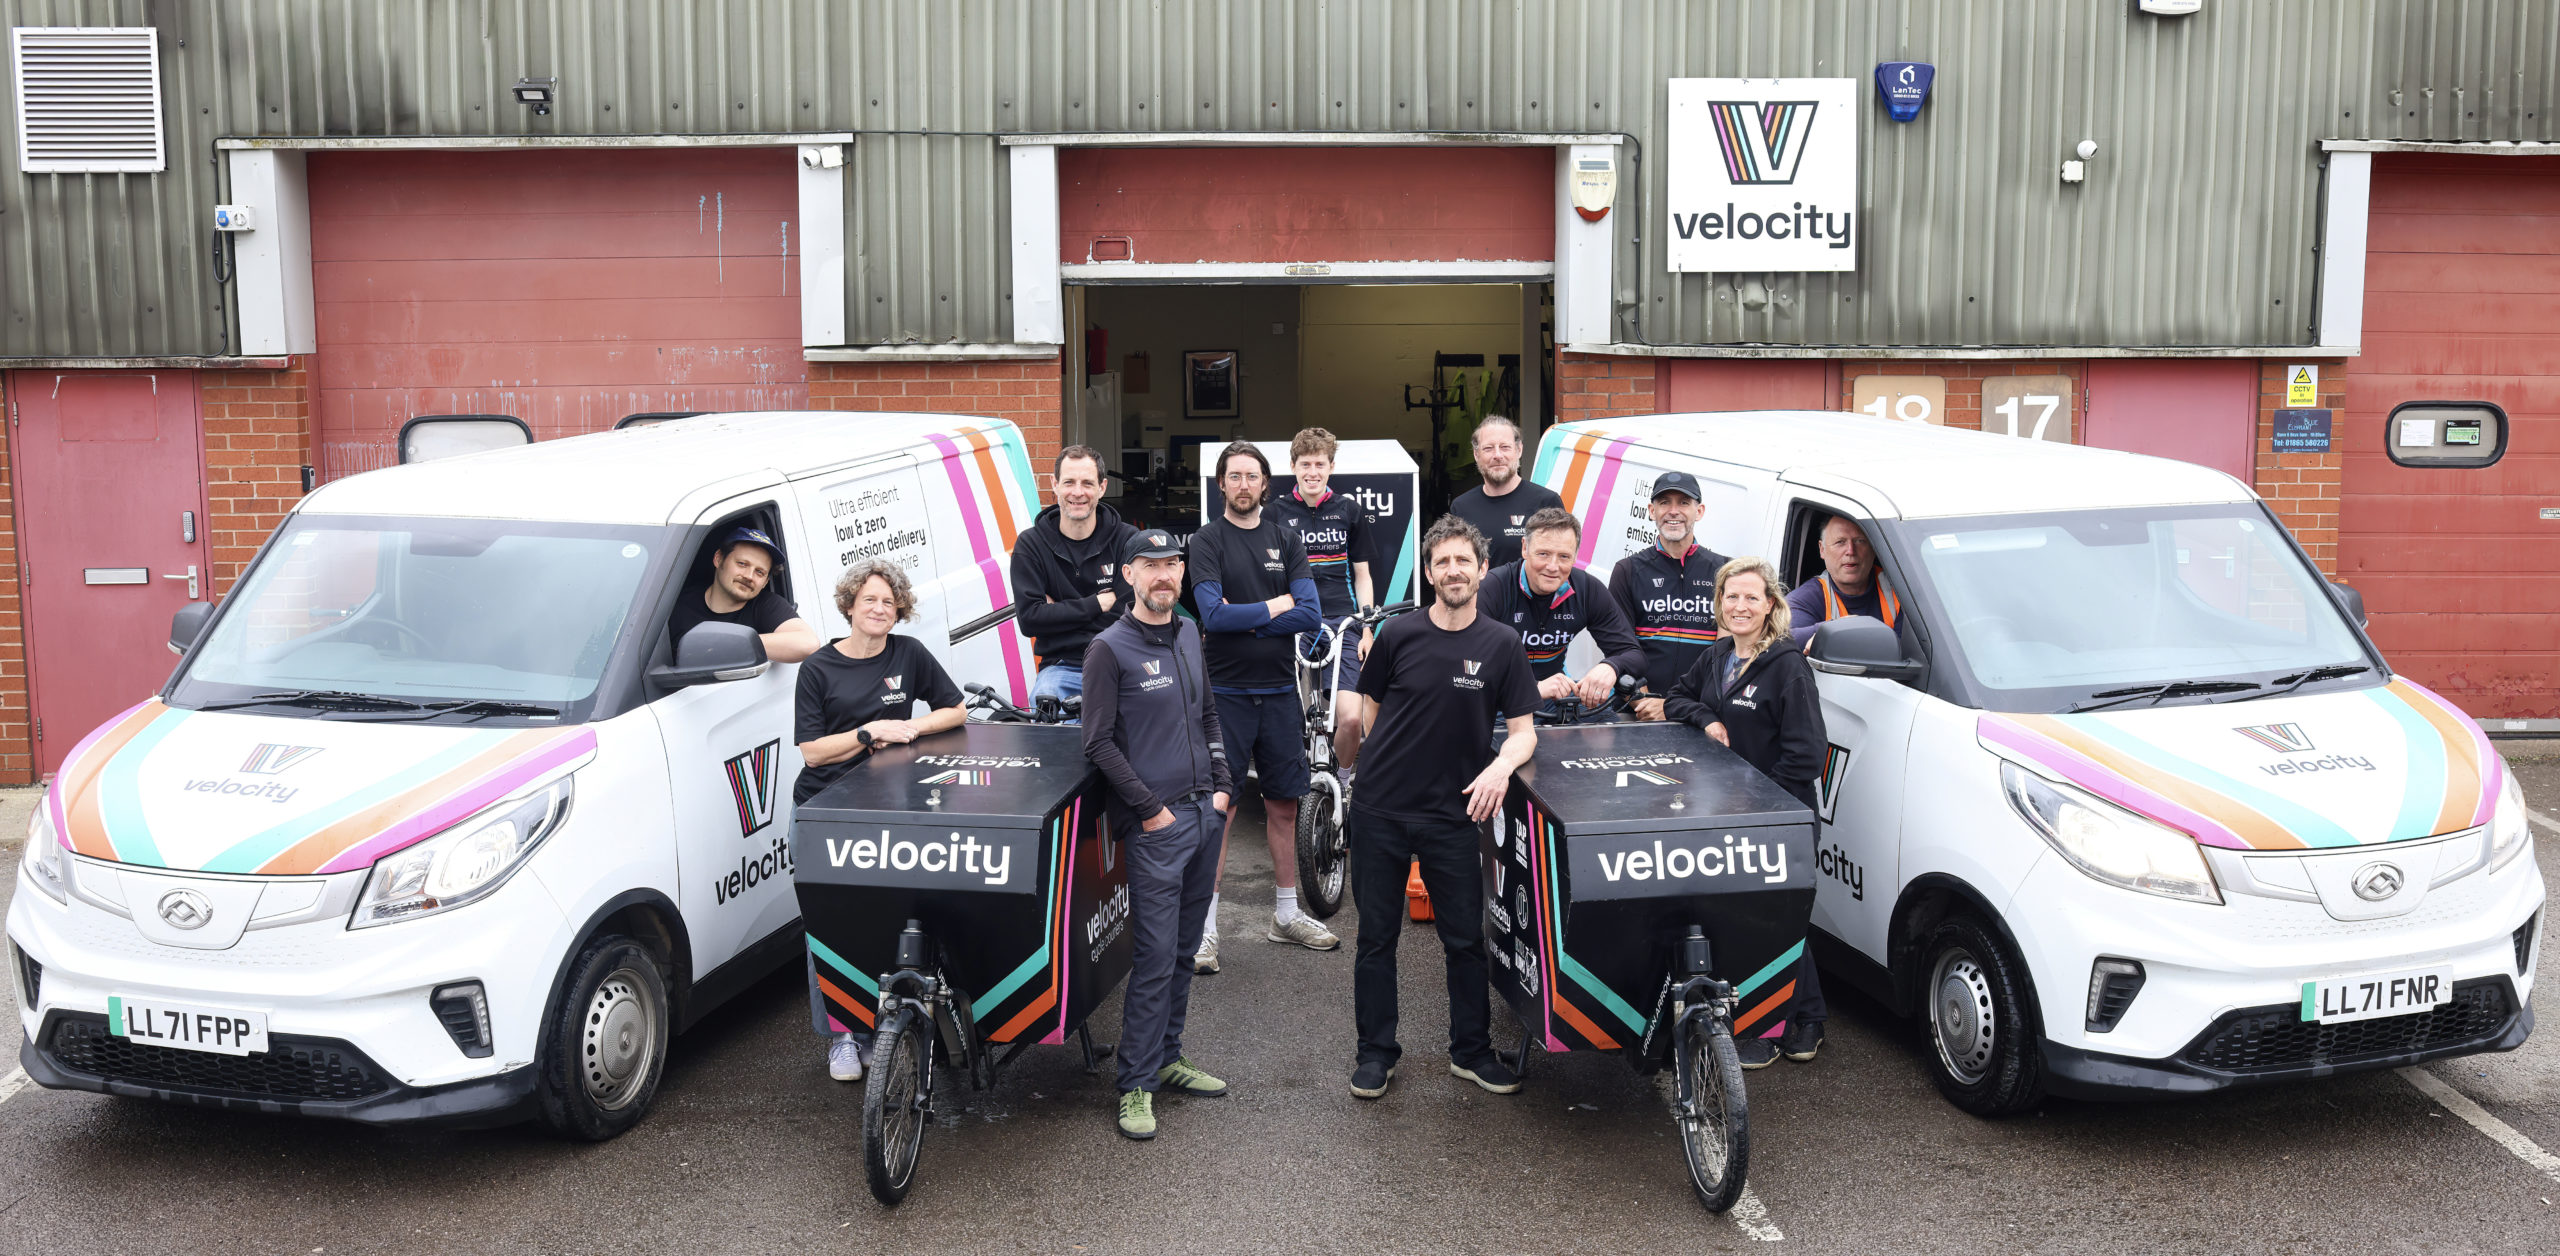 velocity staff posing with bikes and vans